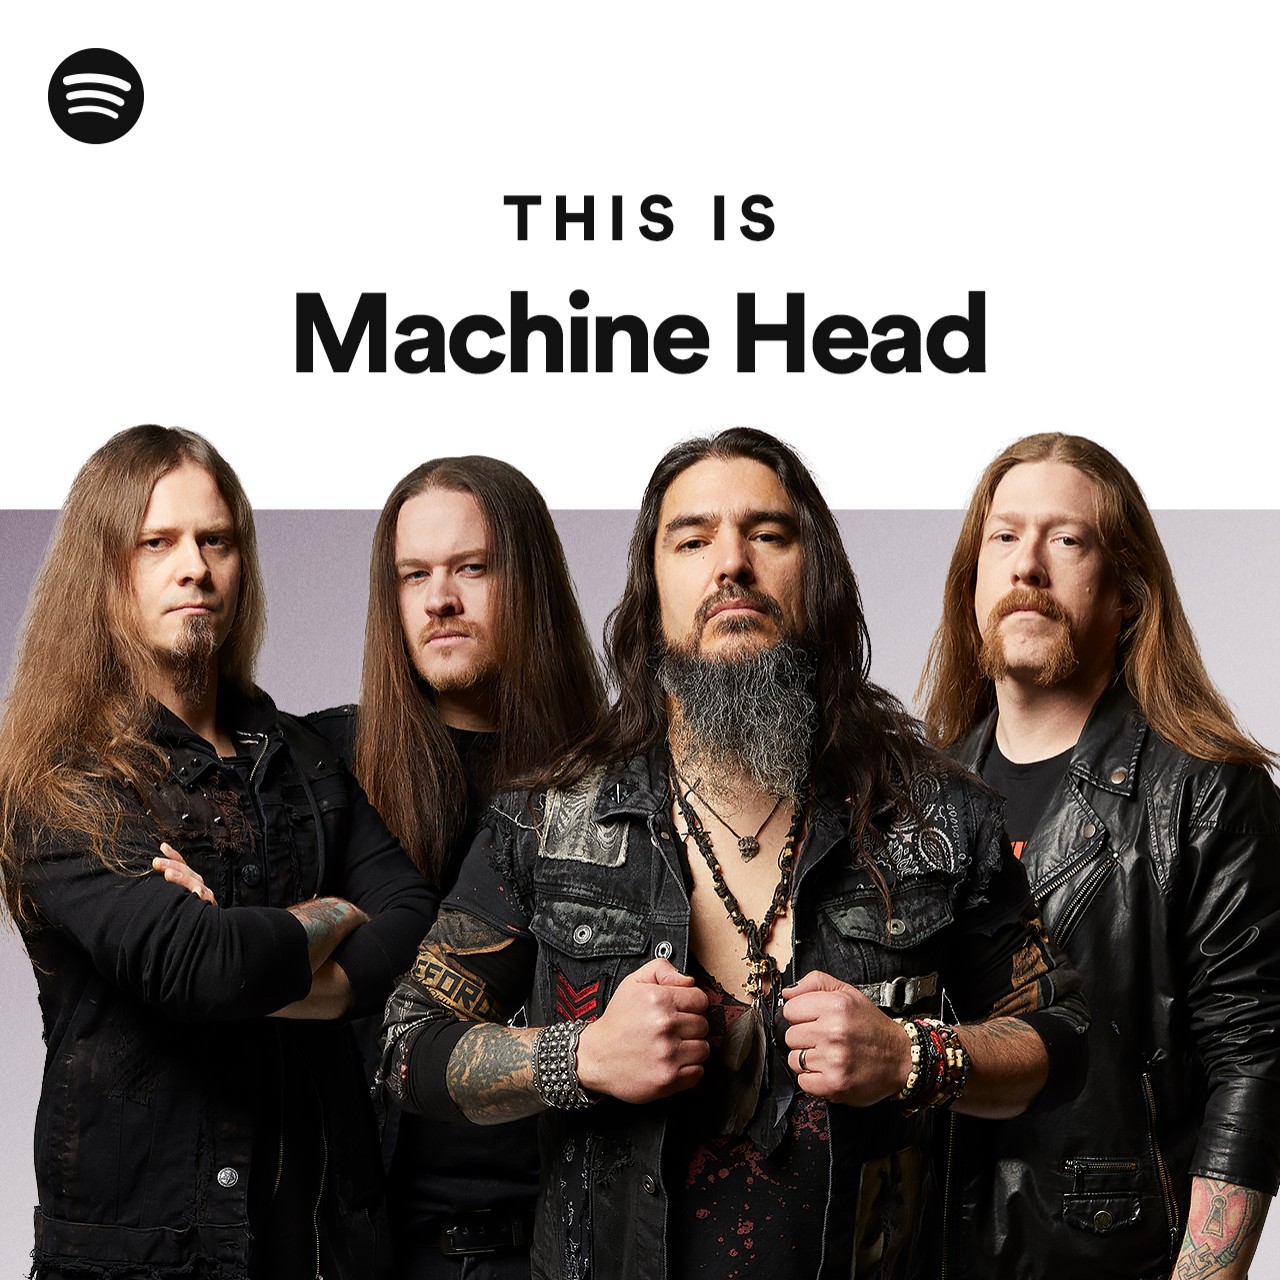 This Is Machine Head